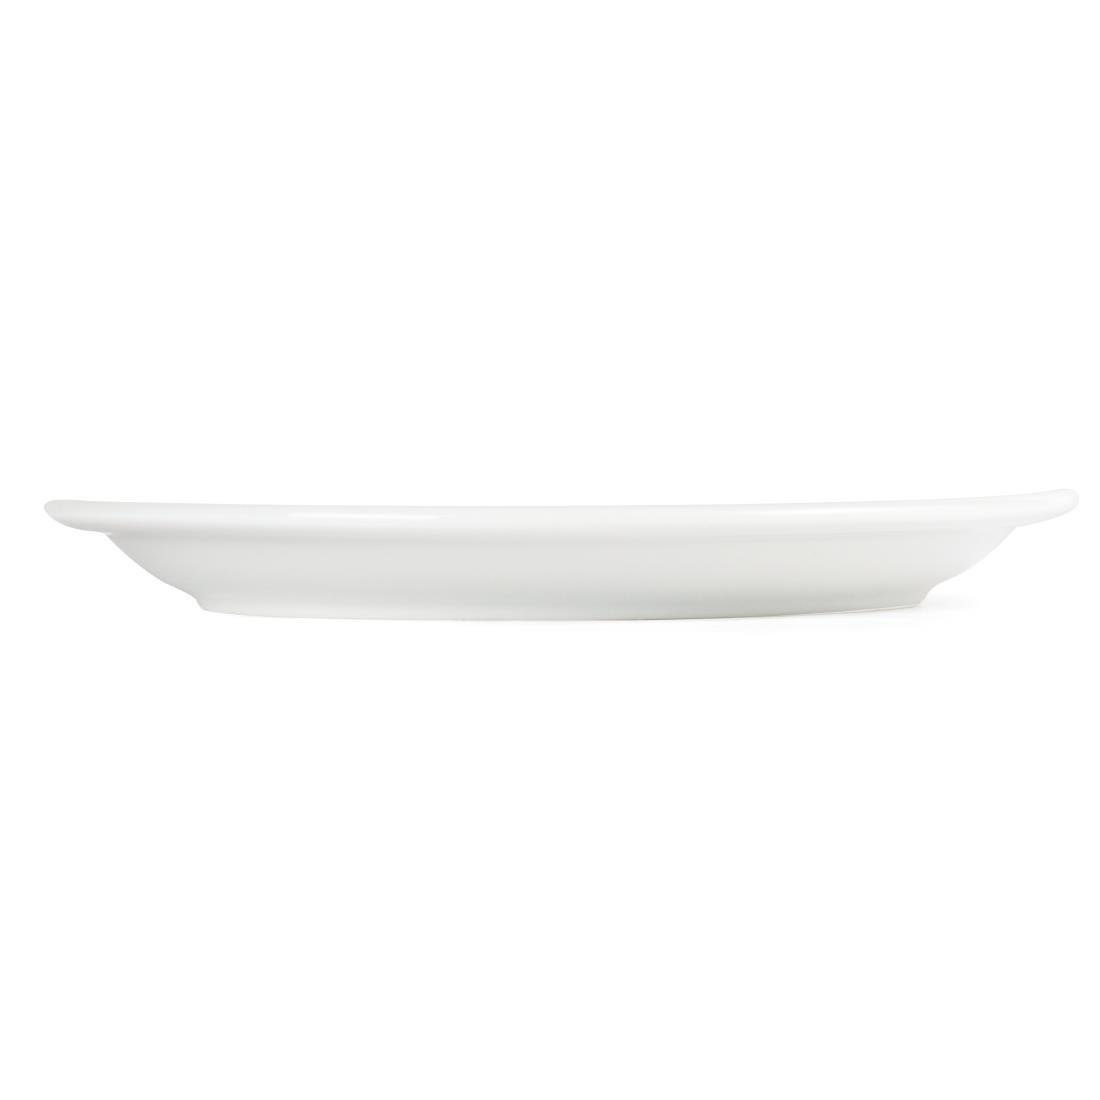 Olympia Whiteware Narrow Rimmed Plates 230mm (Pack of 12) - CB489  - 3